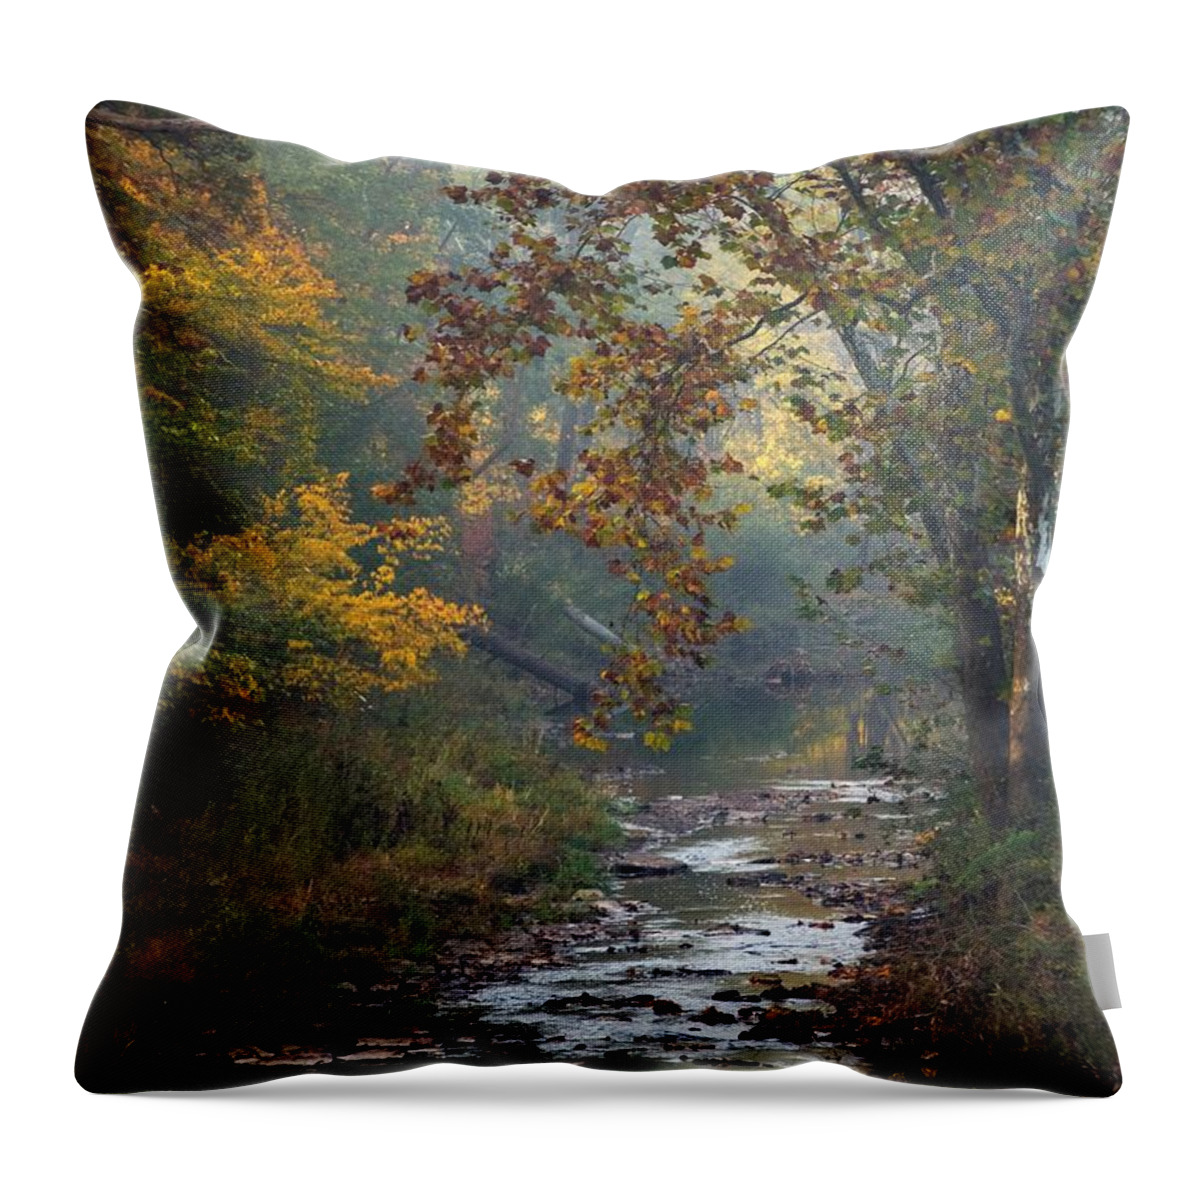 Autumn Throw Pillow featuring the photograph Autumn by the Creek by Elsa Santoro